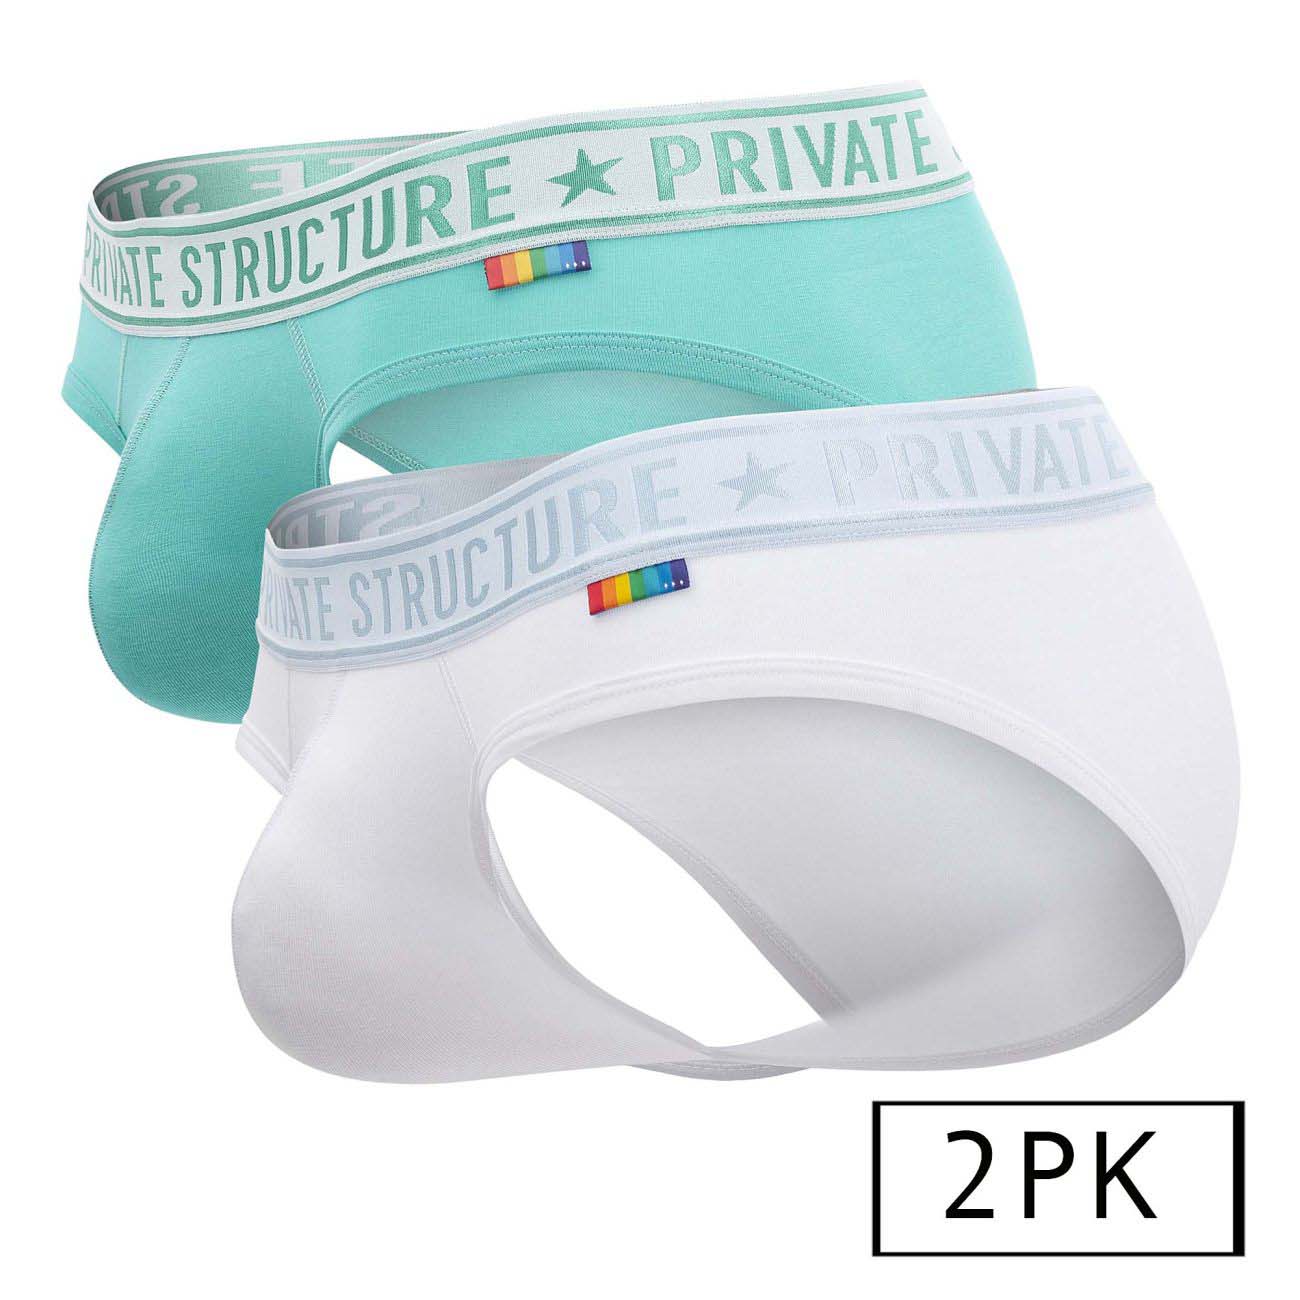 Pack of 2 Brief Private Structure Pride EPUT4385